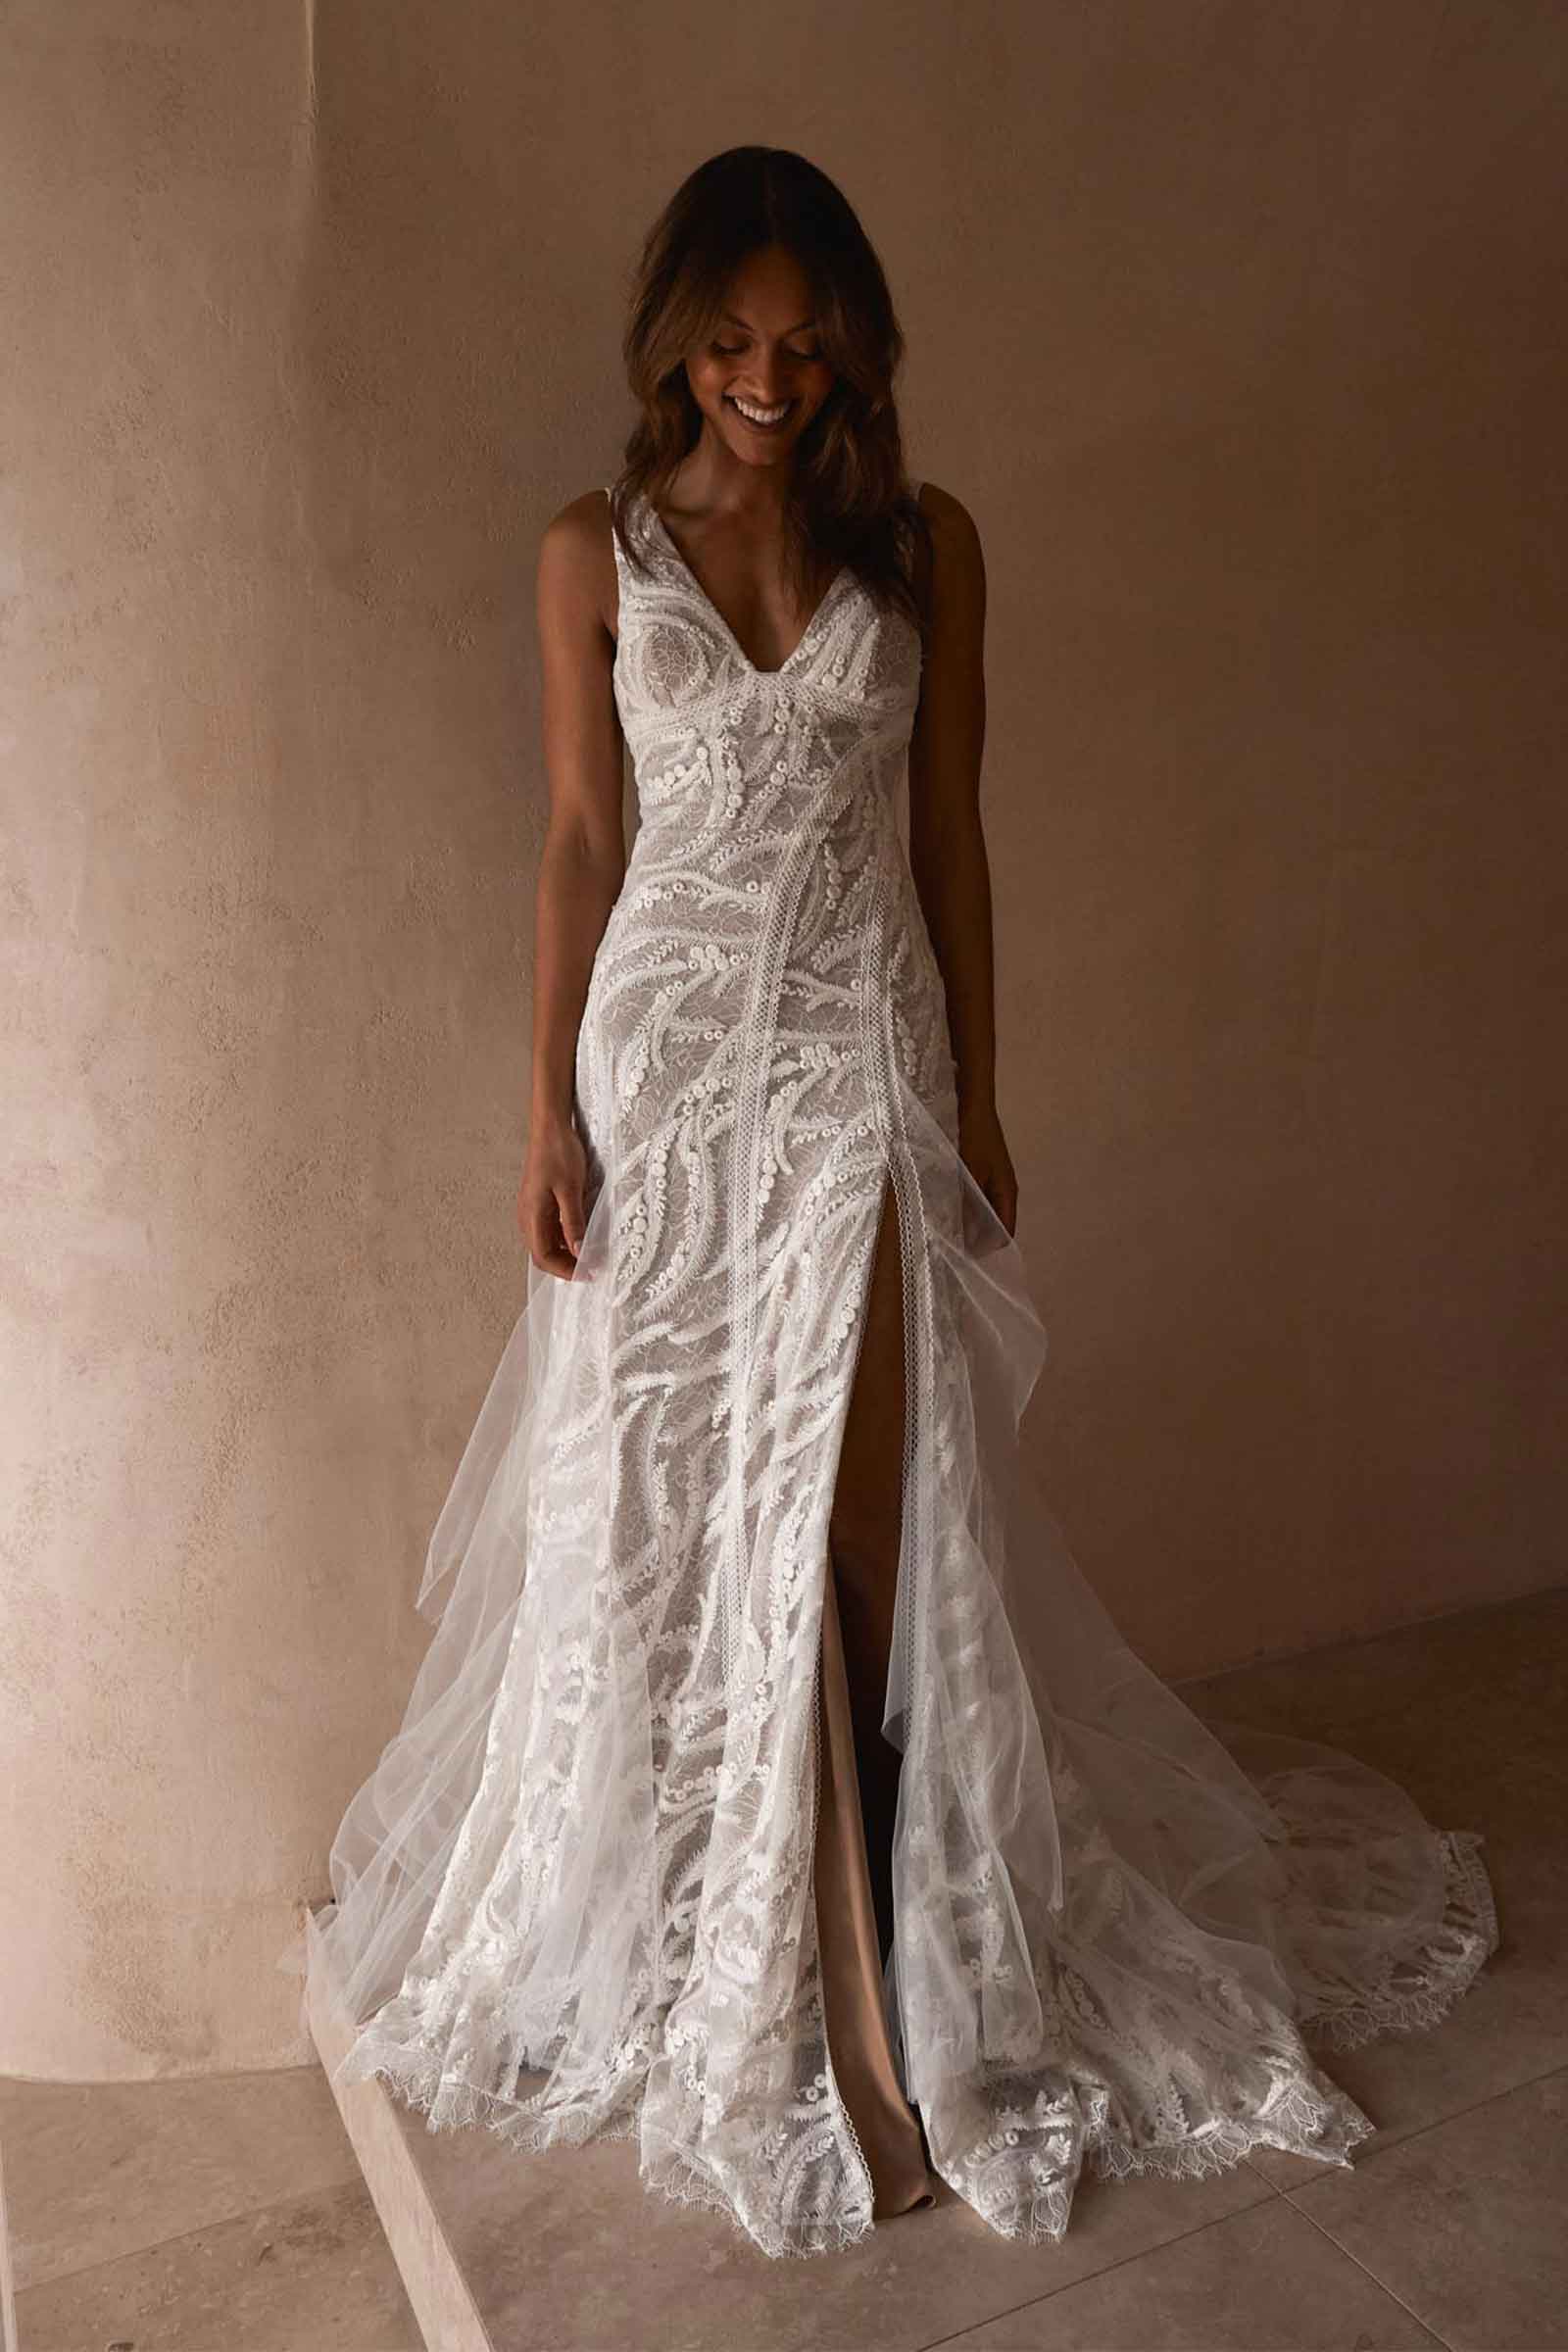 Grace Loves Lace: Where Bridal Dreams and Artful Craftsmanship